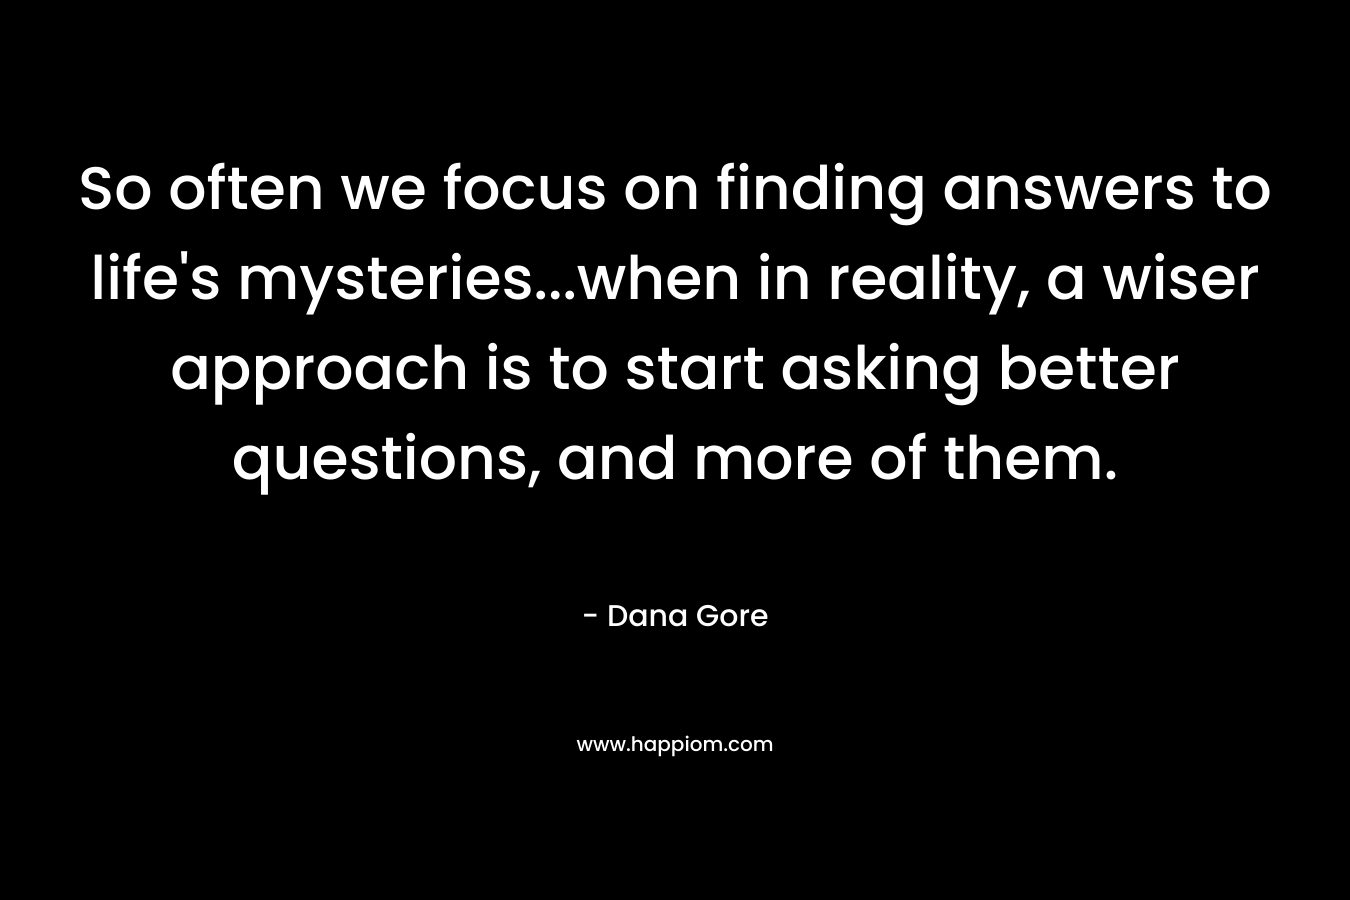 So often we focus on finding answers to life's mysteries...when in reality, a wiser approach is to start asking better questions, and more of them.